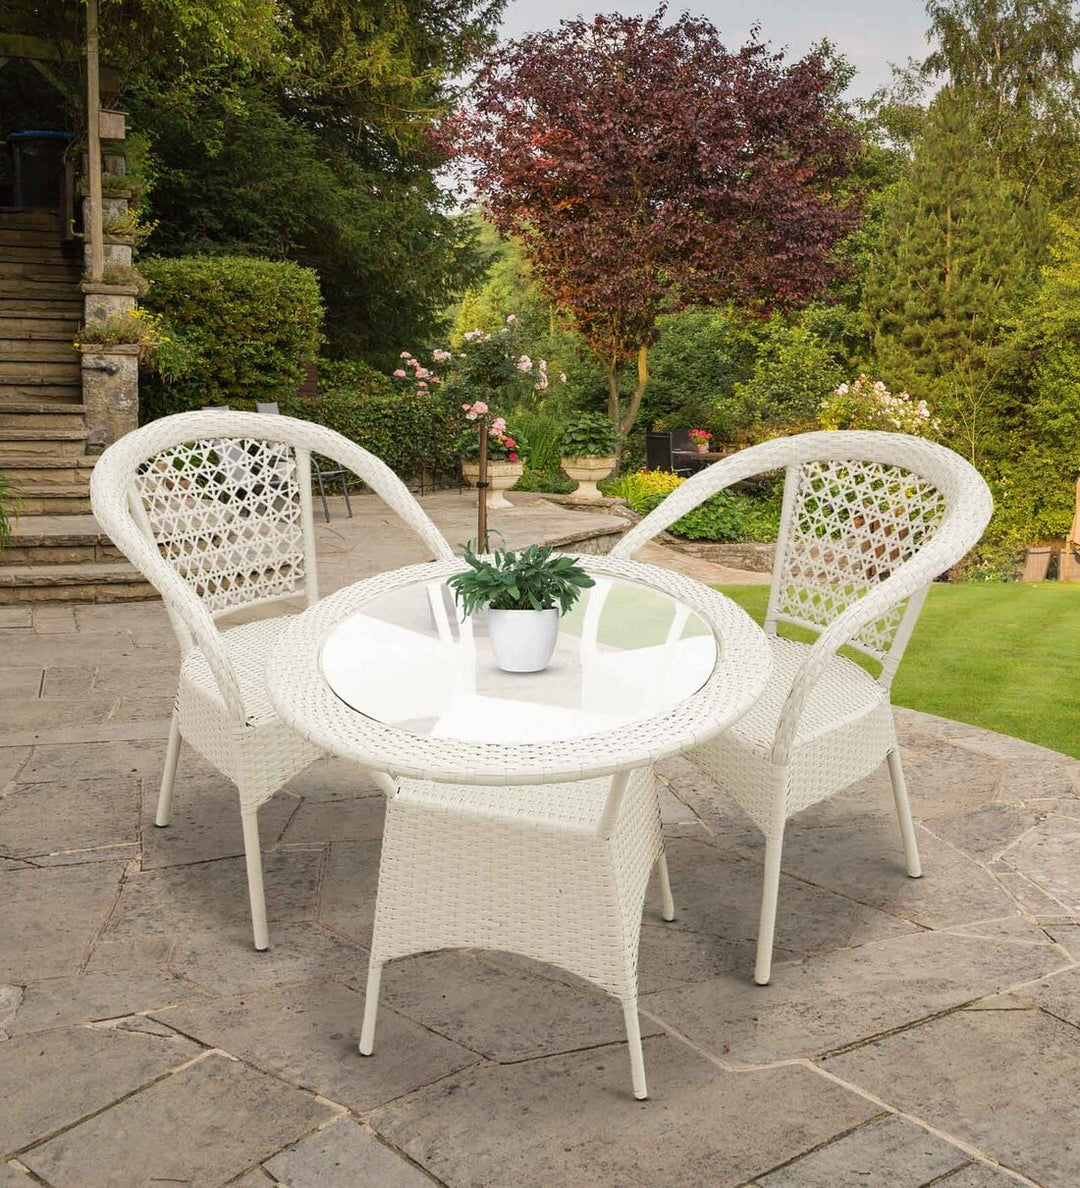 Dreamline Outdoor Furniture Garden Patio Seating Set 1+2 2 Chairs and Table Set Balcony Furniture Coffee Table Set (White)